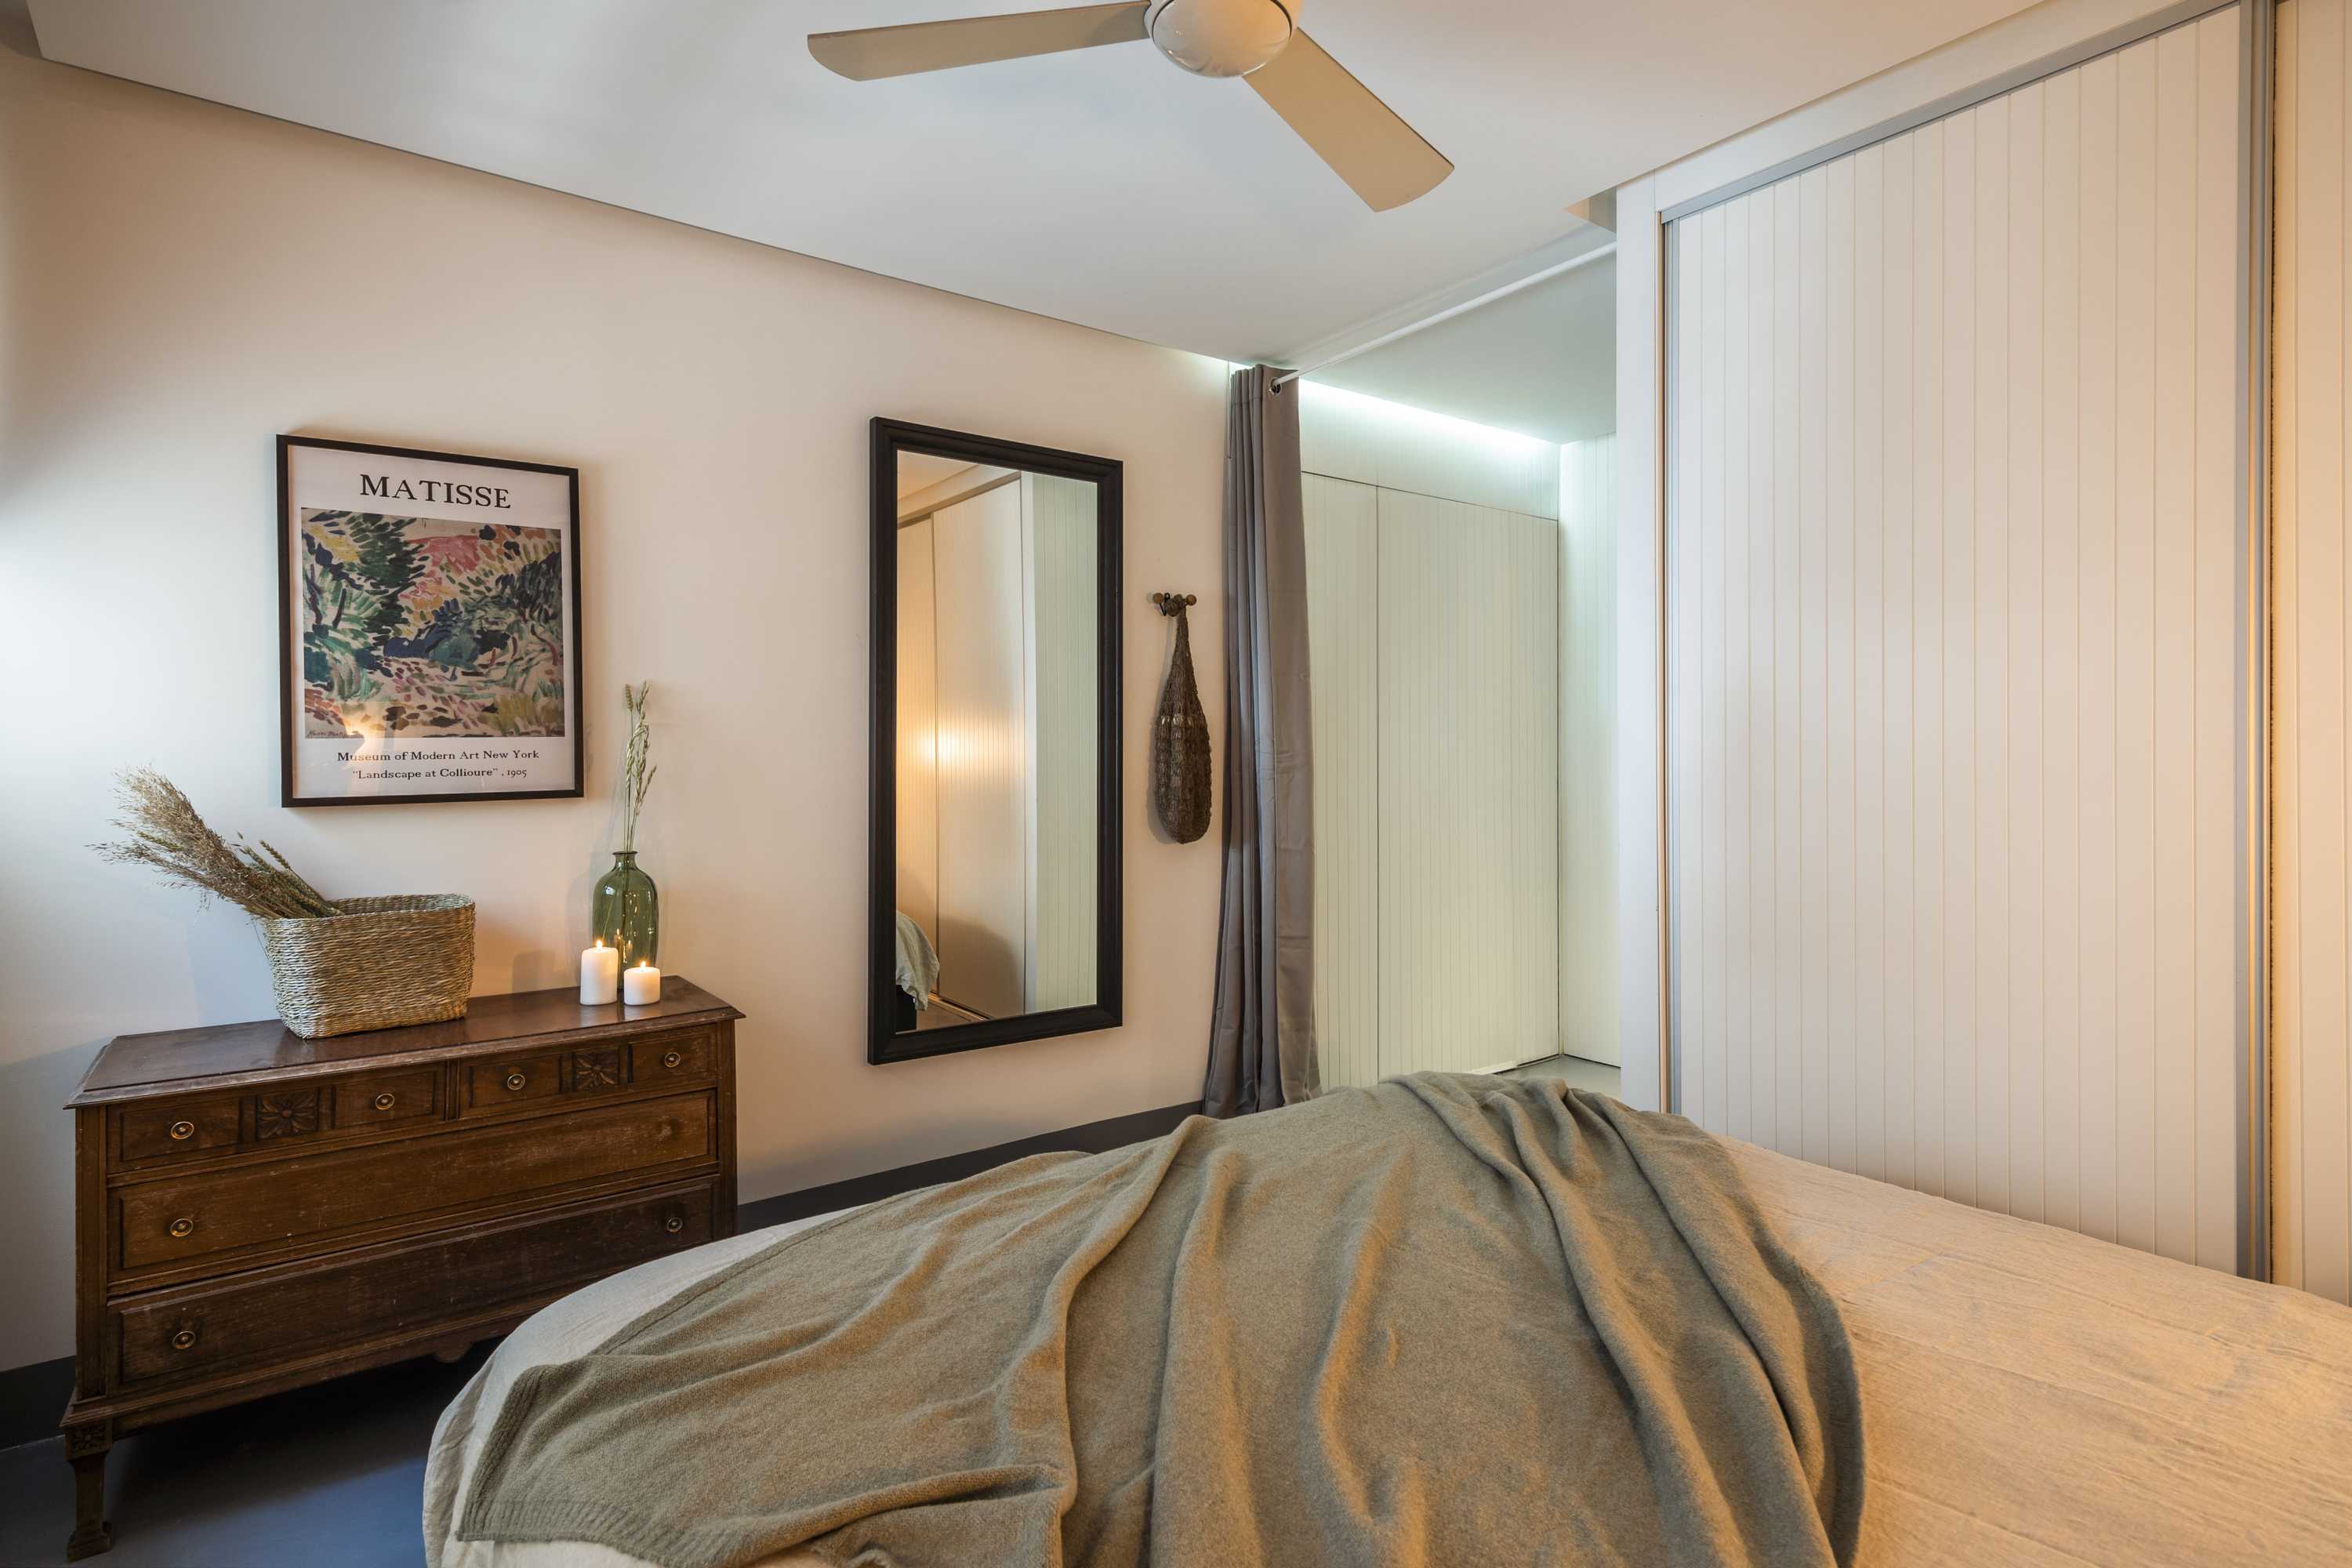 1654093179-bedroom-with-ceiling-fan-fuencarral.jpg